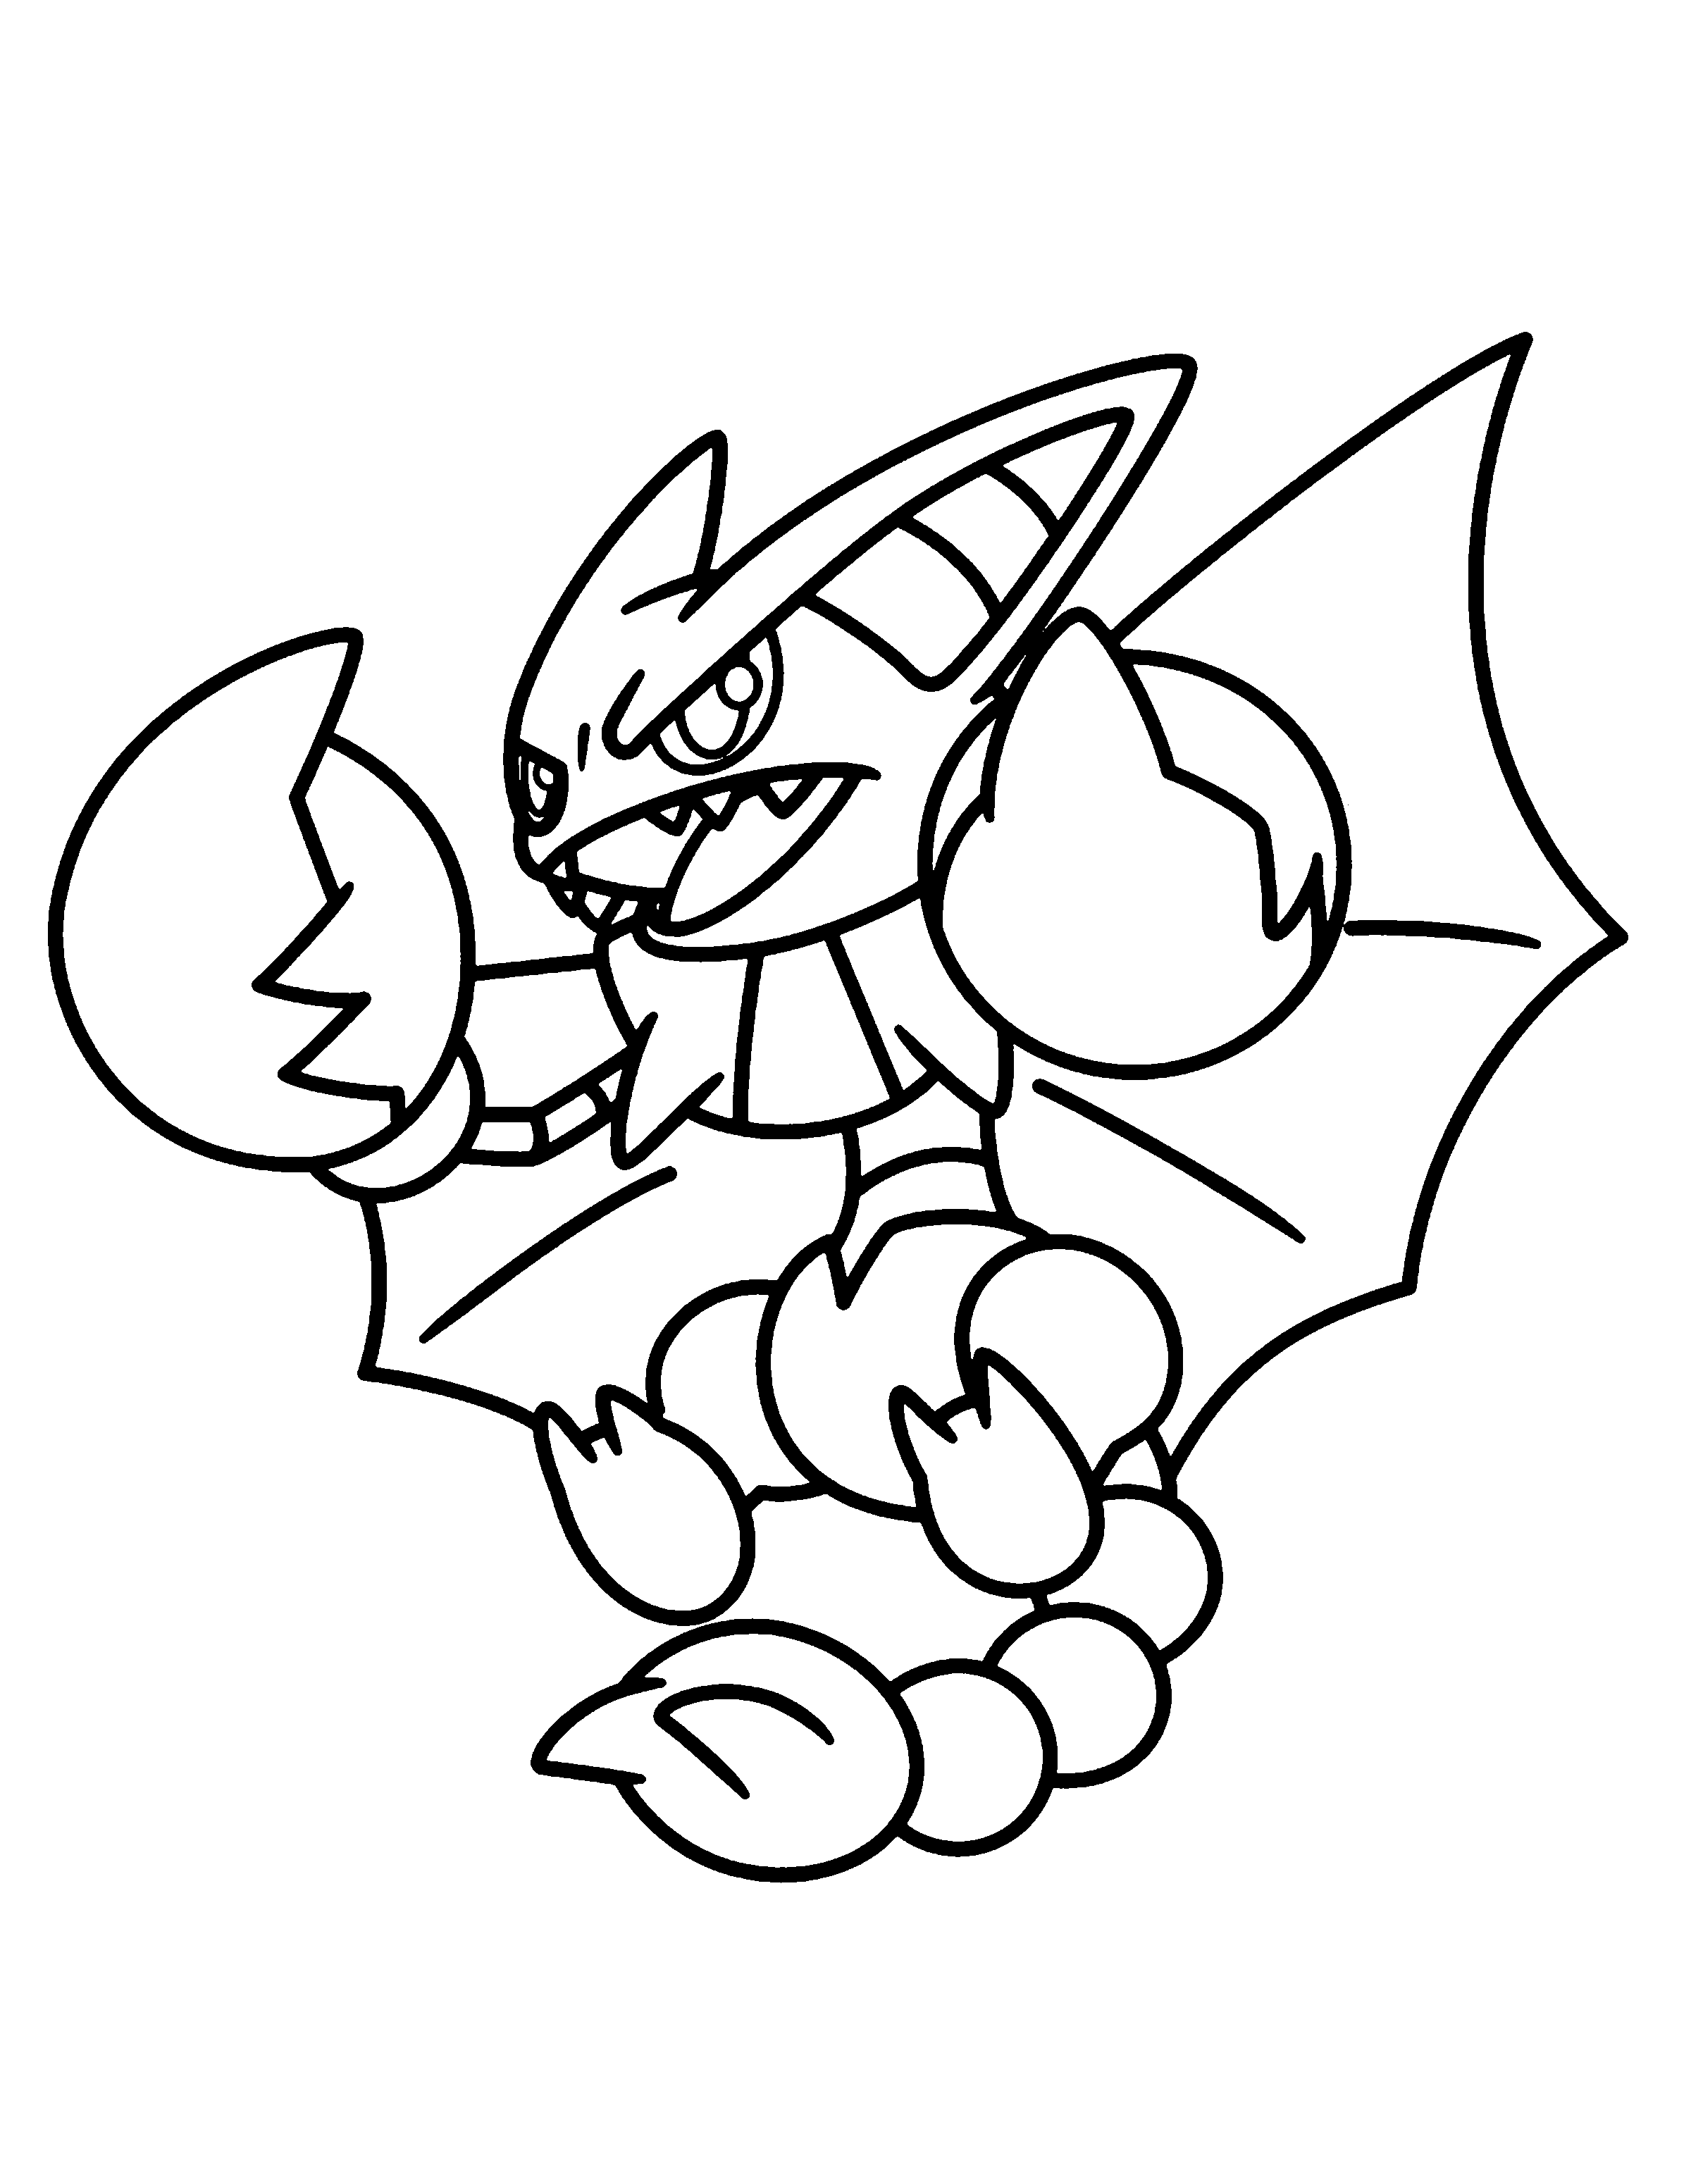 Download Pokemon diamond pearl Coloring Pages